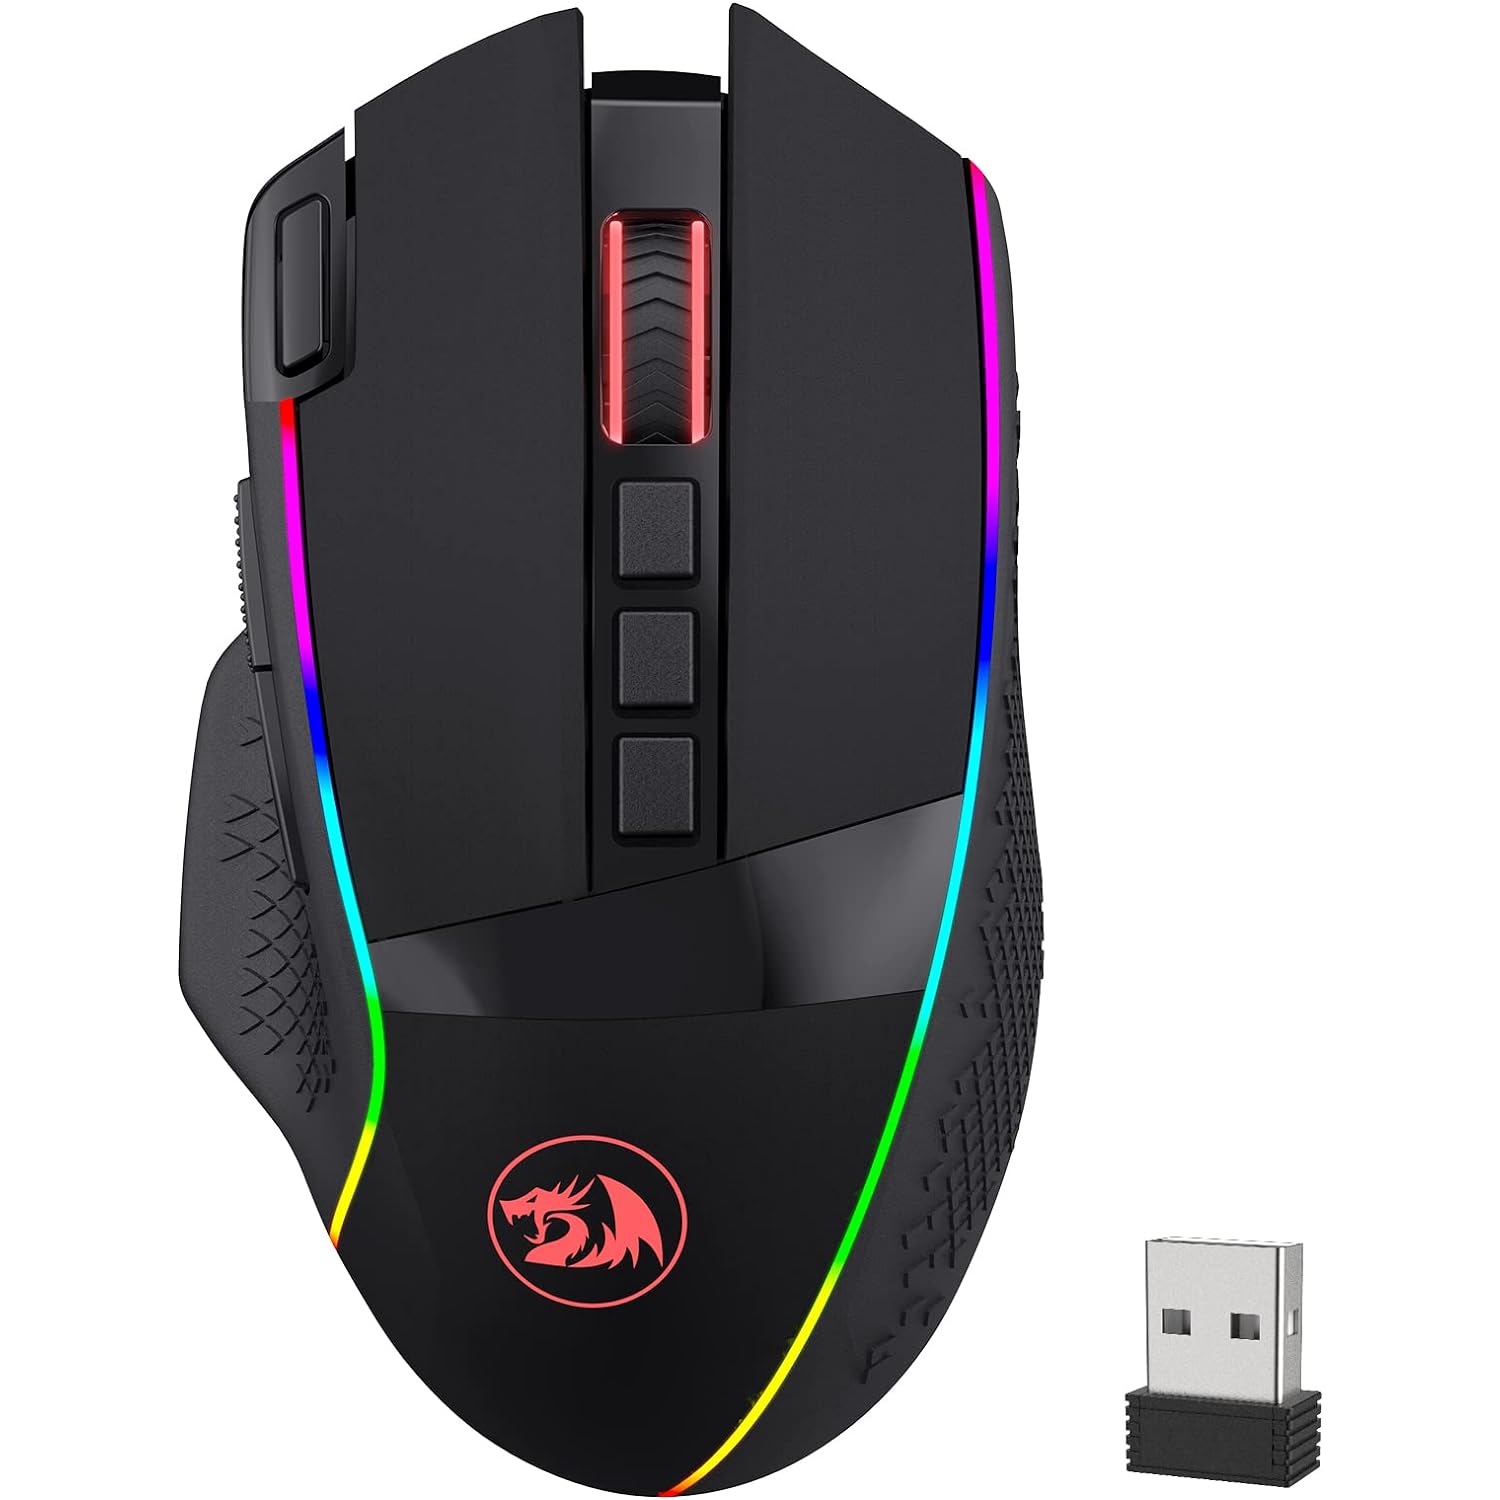 Redragon M991 Wireless Gaming Mouse, 19000 DPI Wired/Wireless Gamer Mouse with Professional Sensor, Durable Power Capacity, Customizable Macro and RGB Backlight for PC/Mac/Laptop